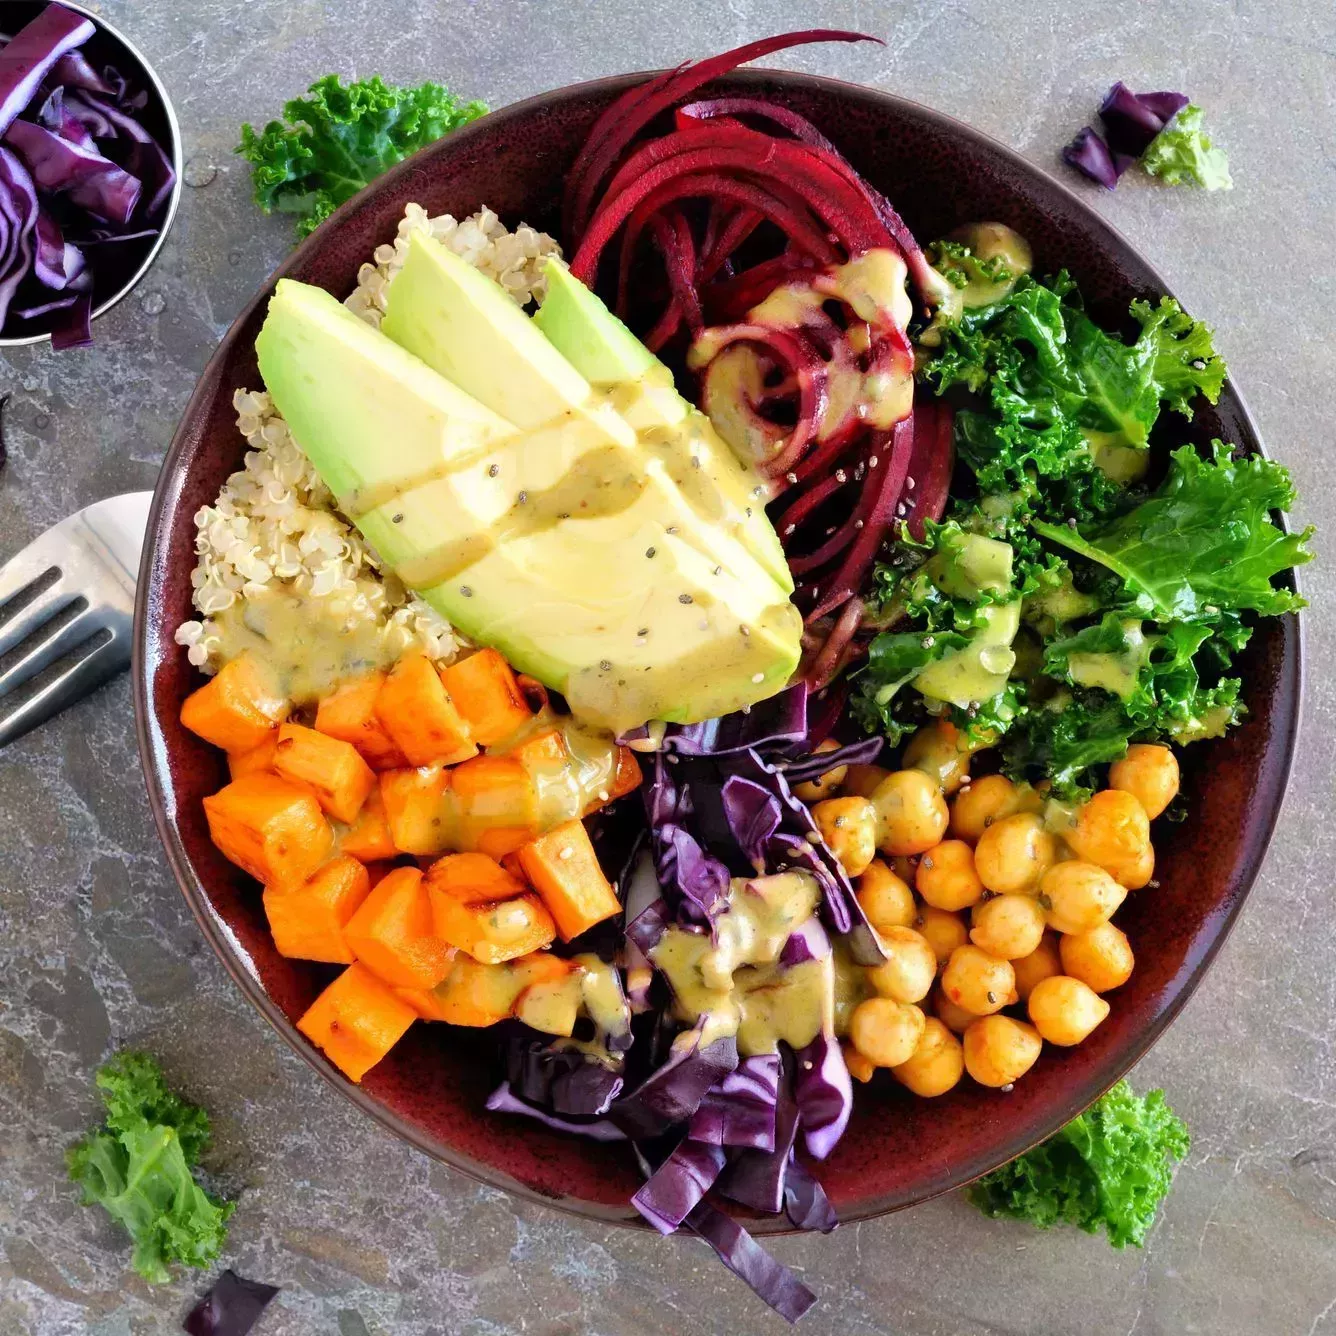 Buddha bowl on a stone background. Healthy eating, overhead scene.